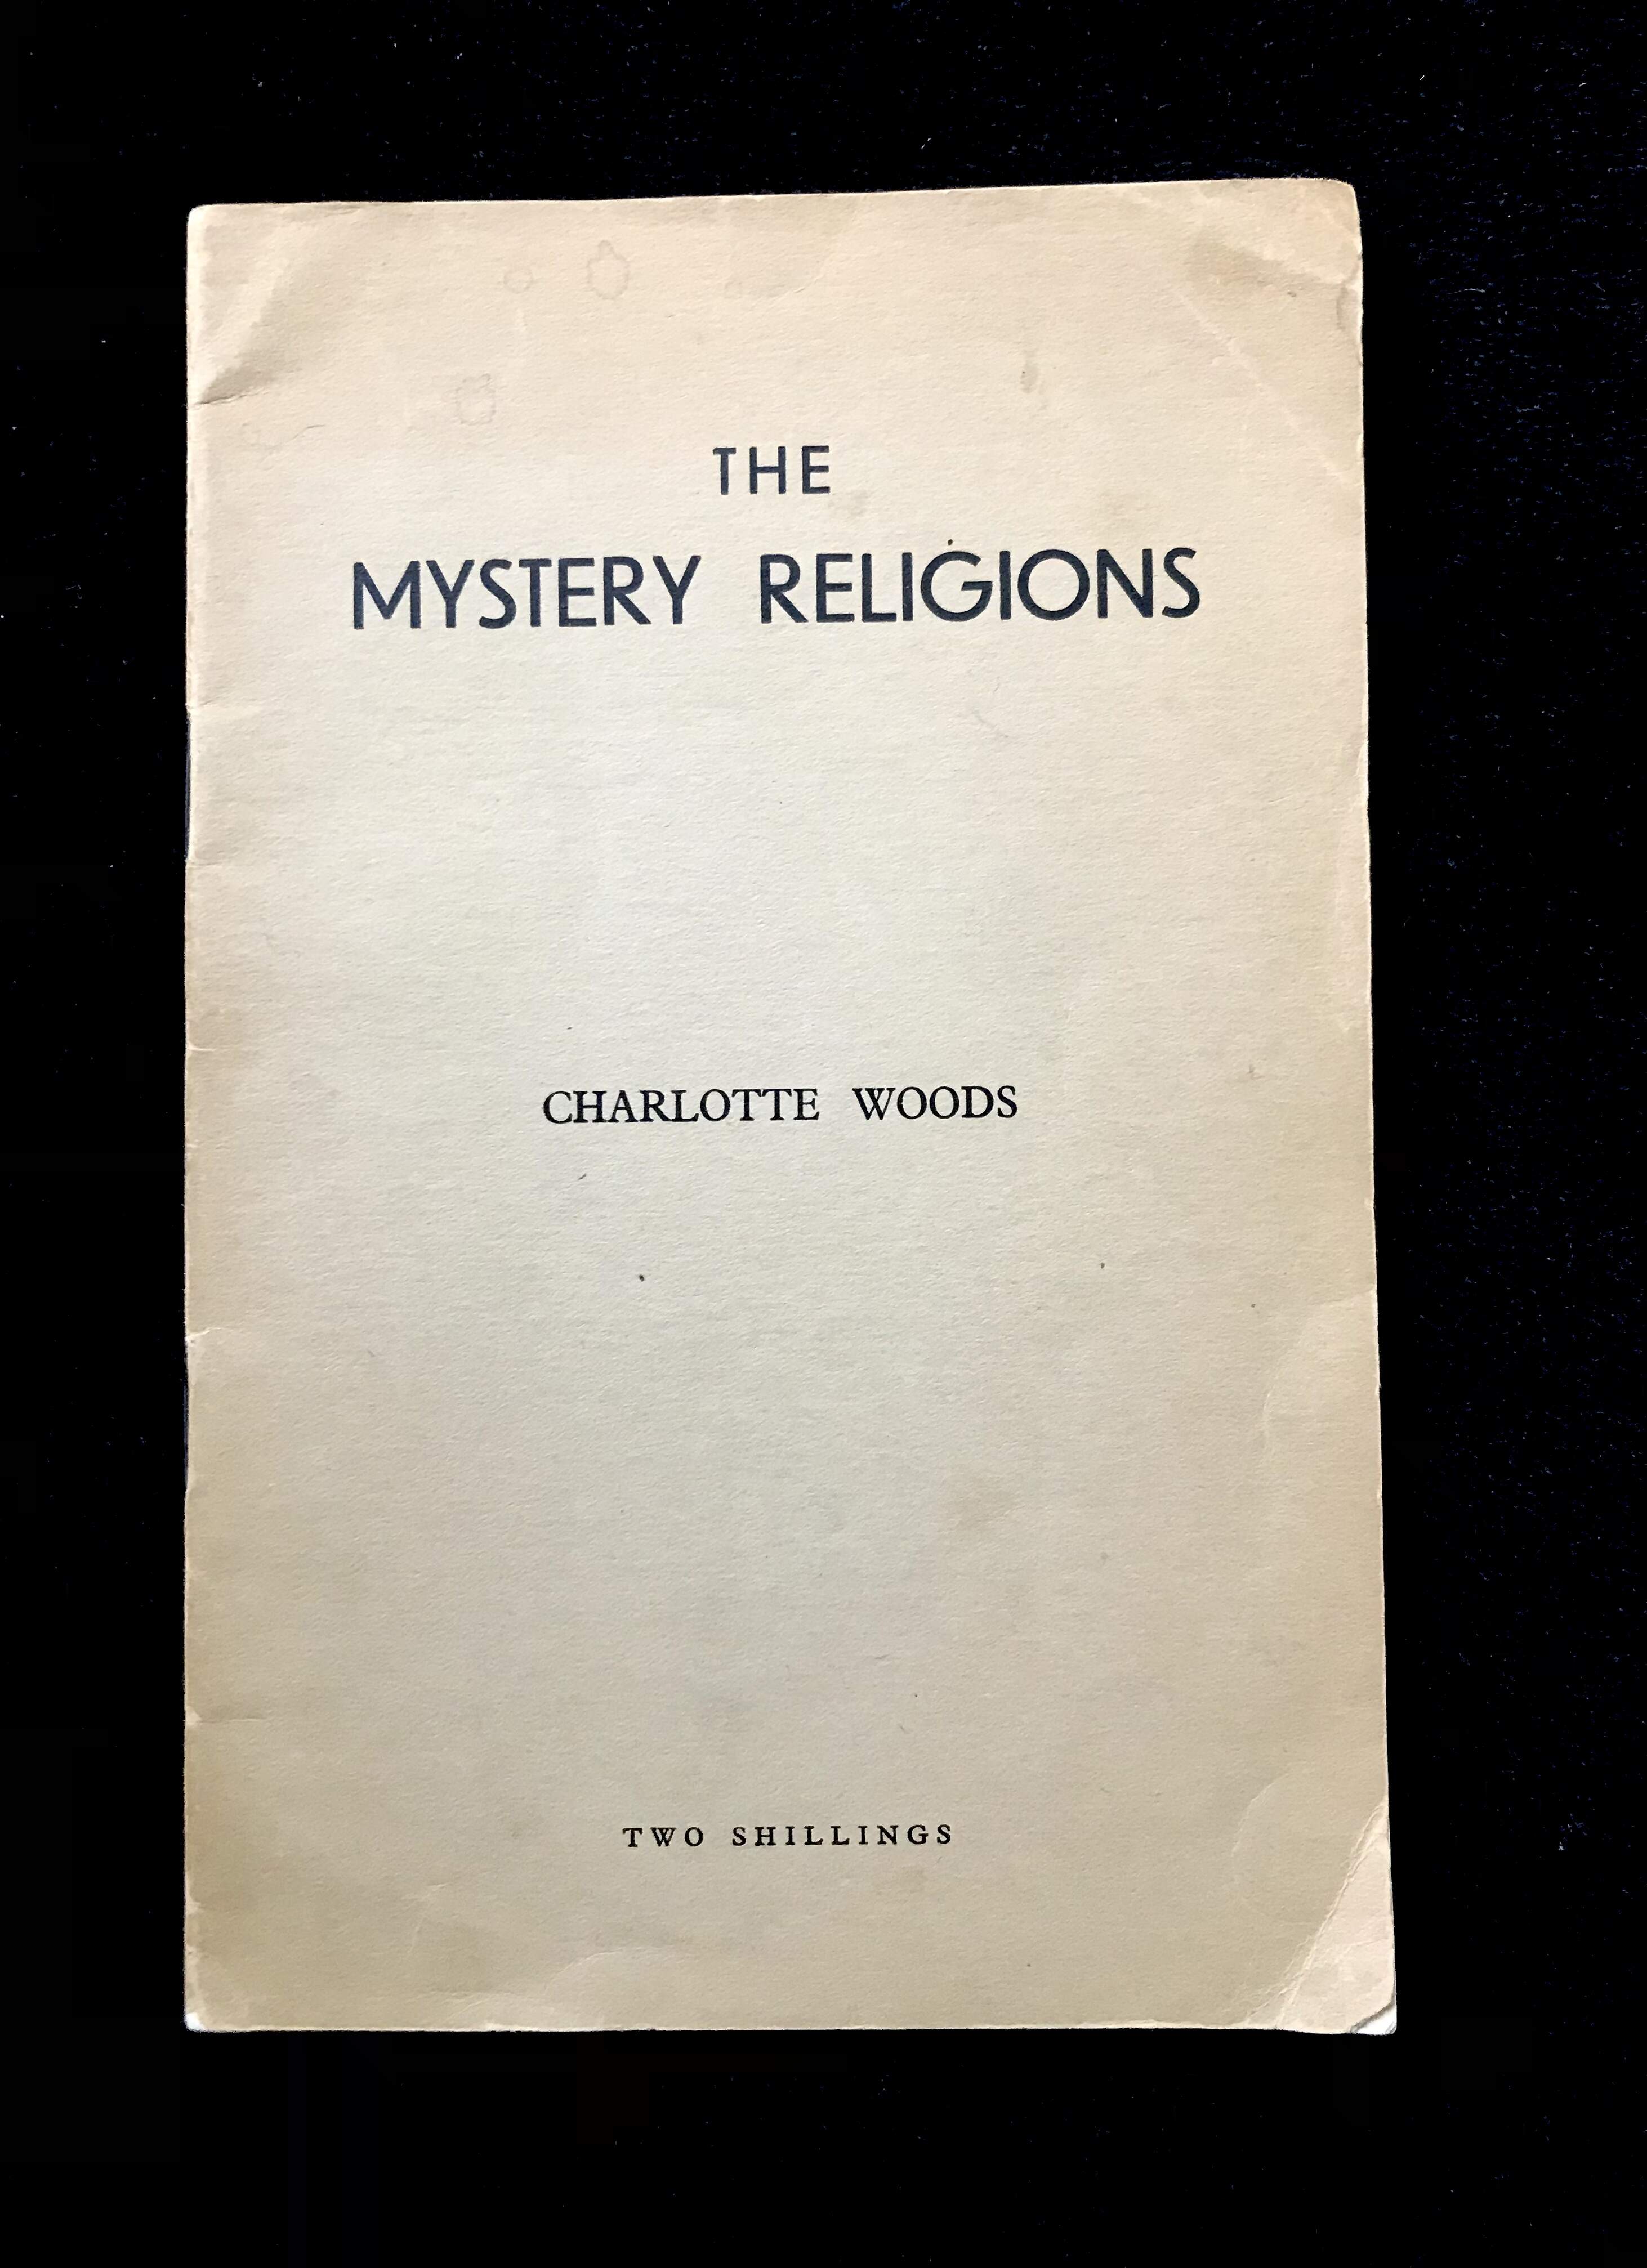 The Mystery Religions by Charlotte Woods